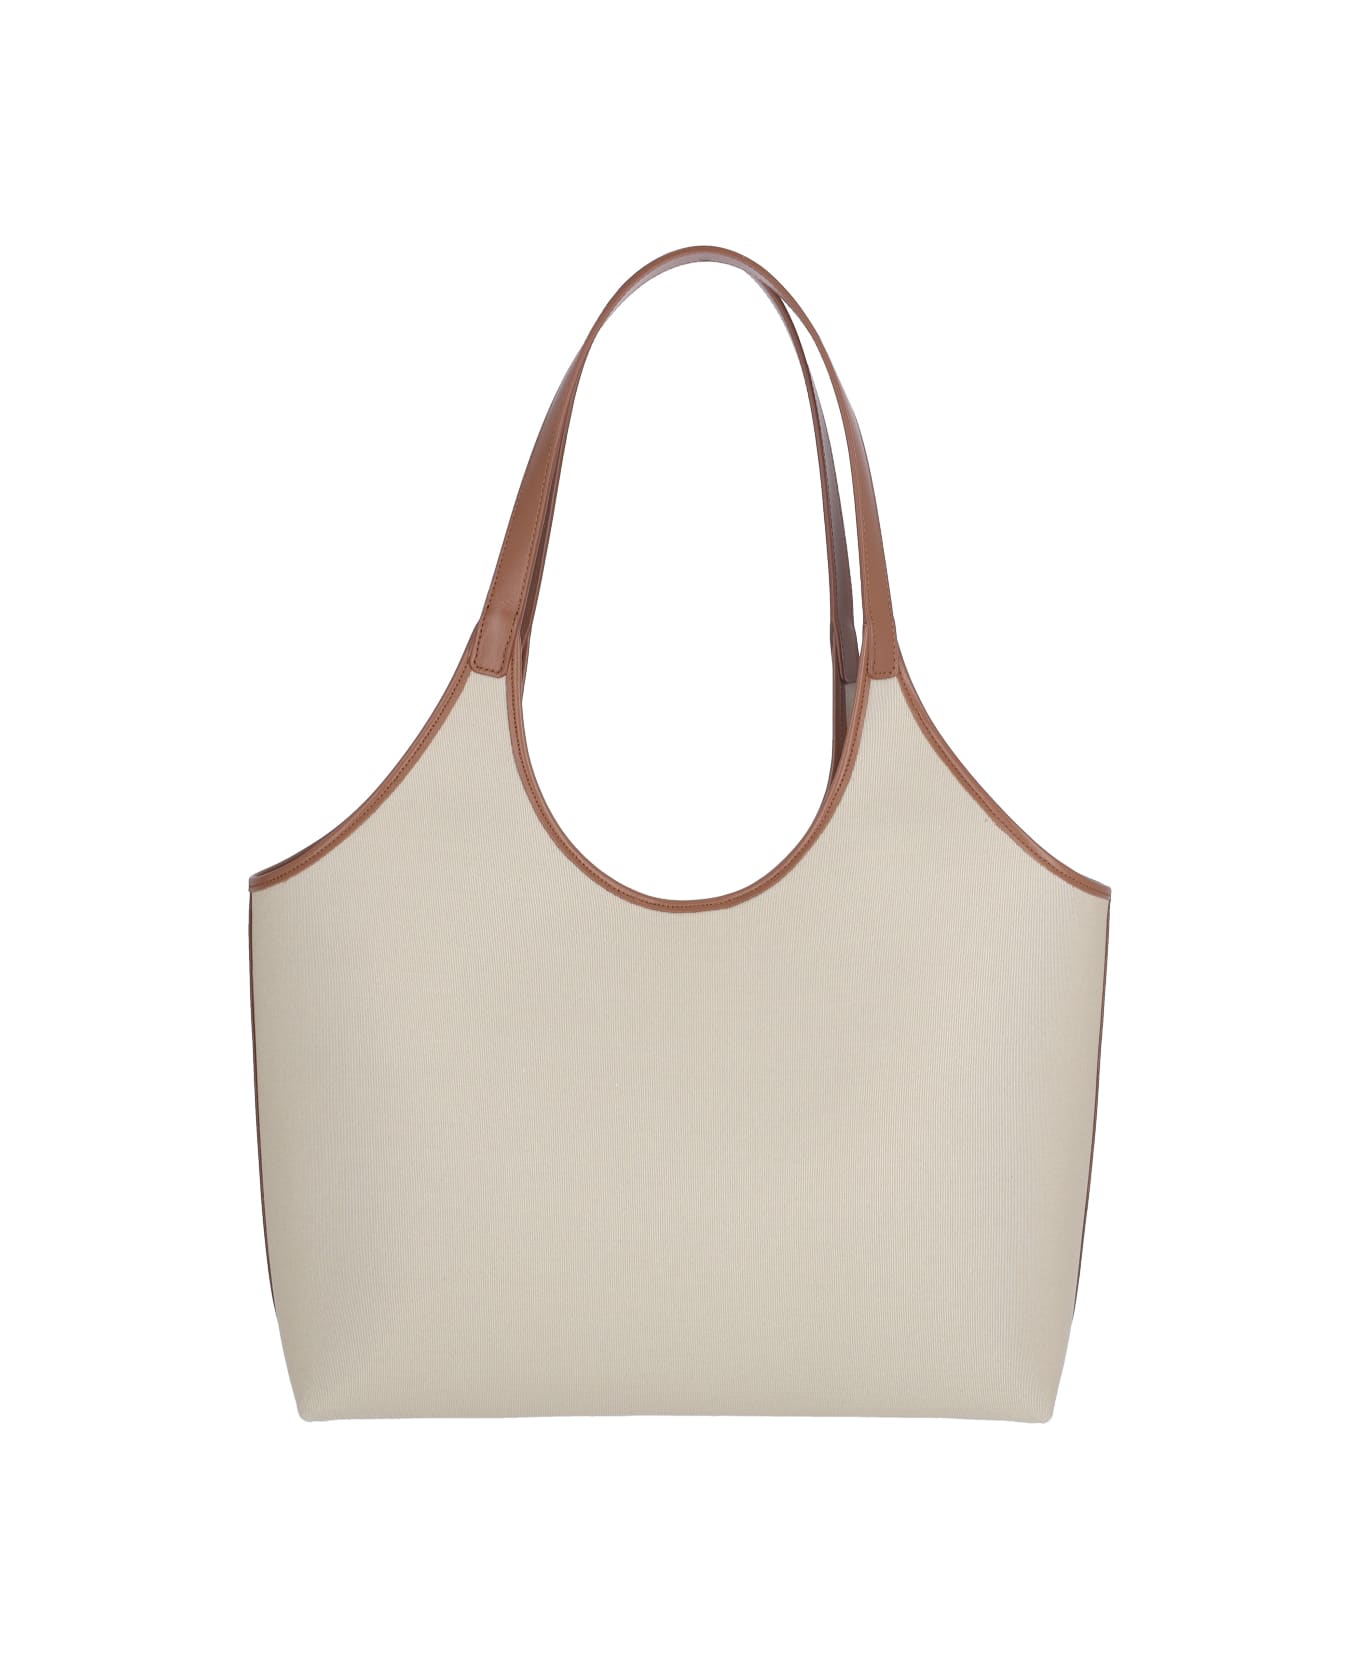 Aesther Ekme 'cabas' Tote Bag - Beige トートバッグ